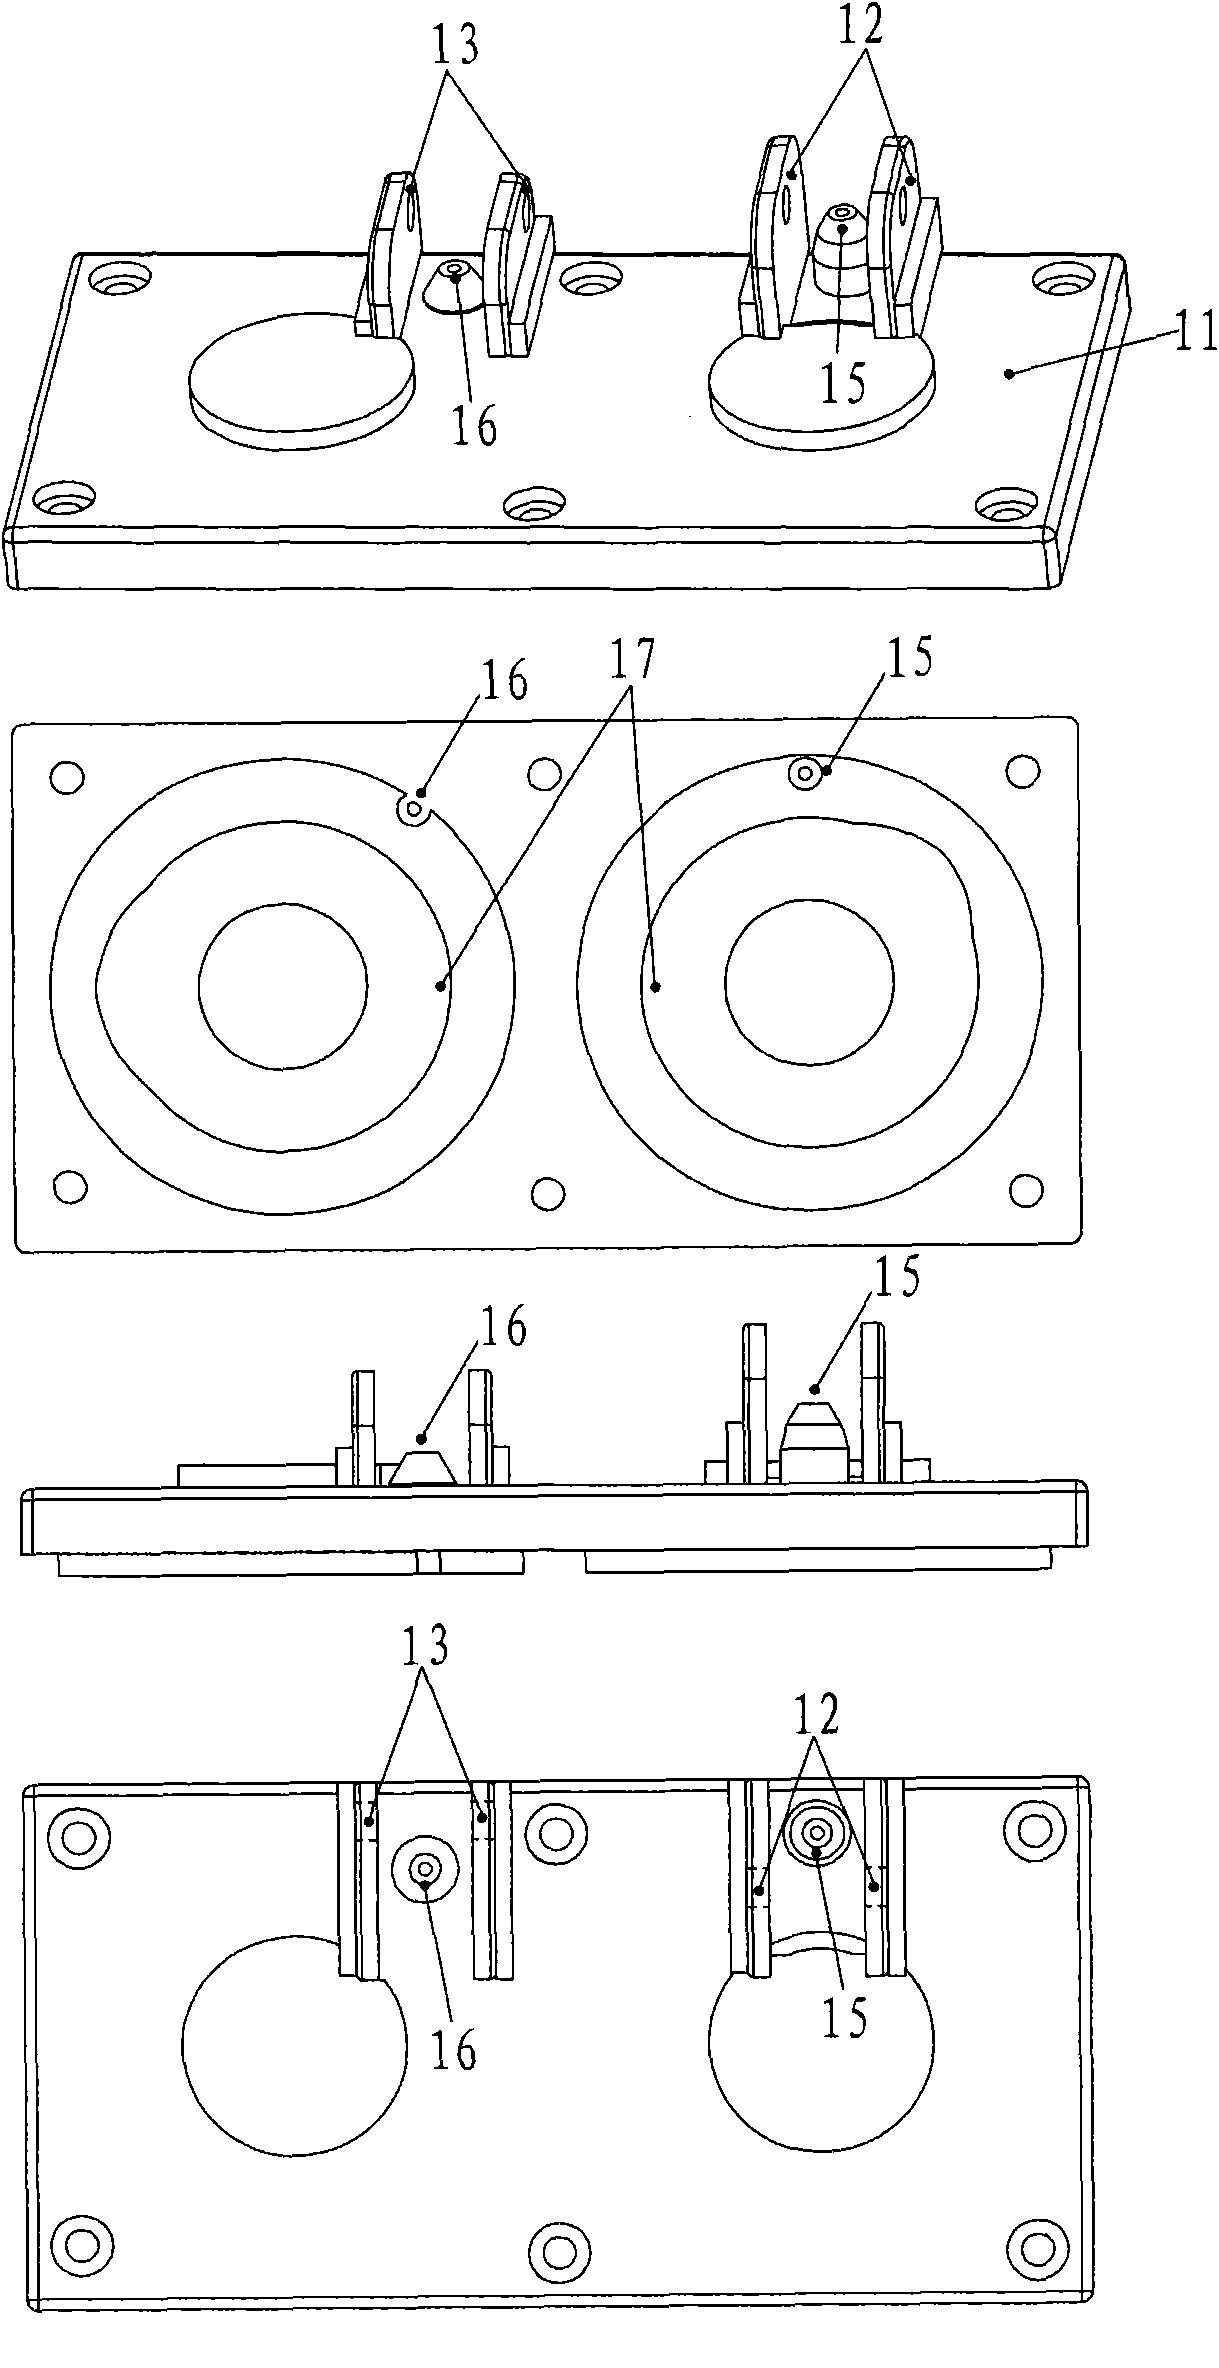 Self-closed water-saving device, method and toilet stool